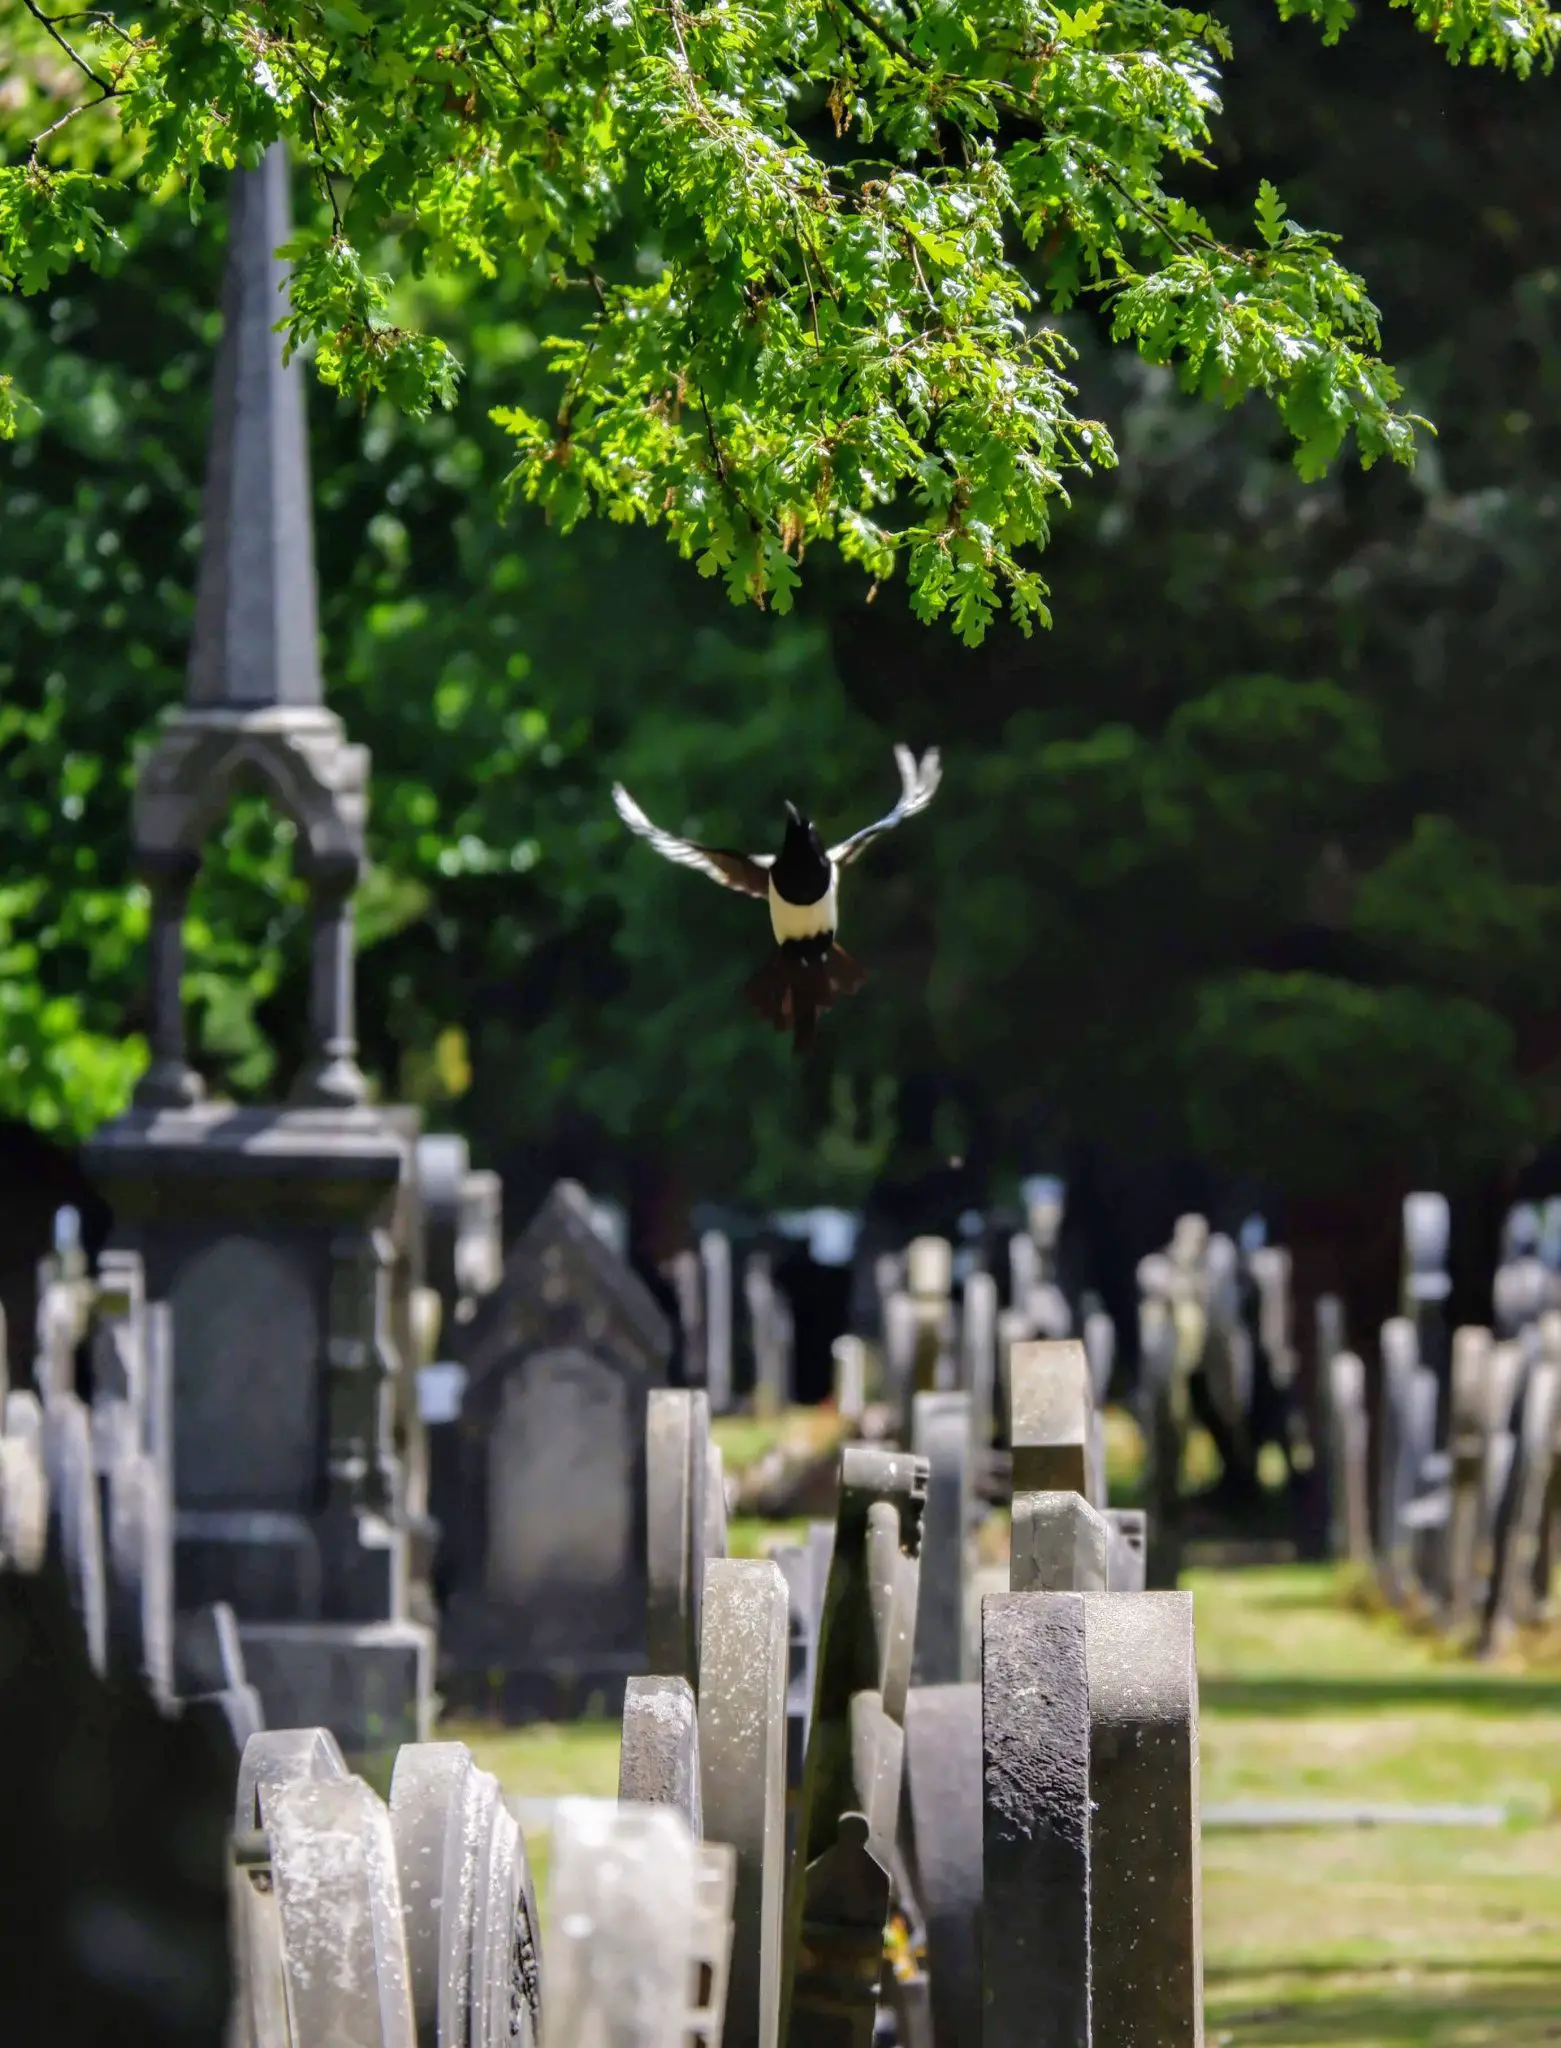 Magpie in Southern Cemetery in Manchester